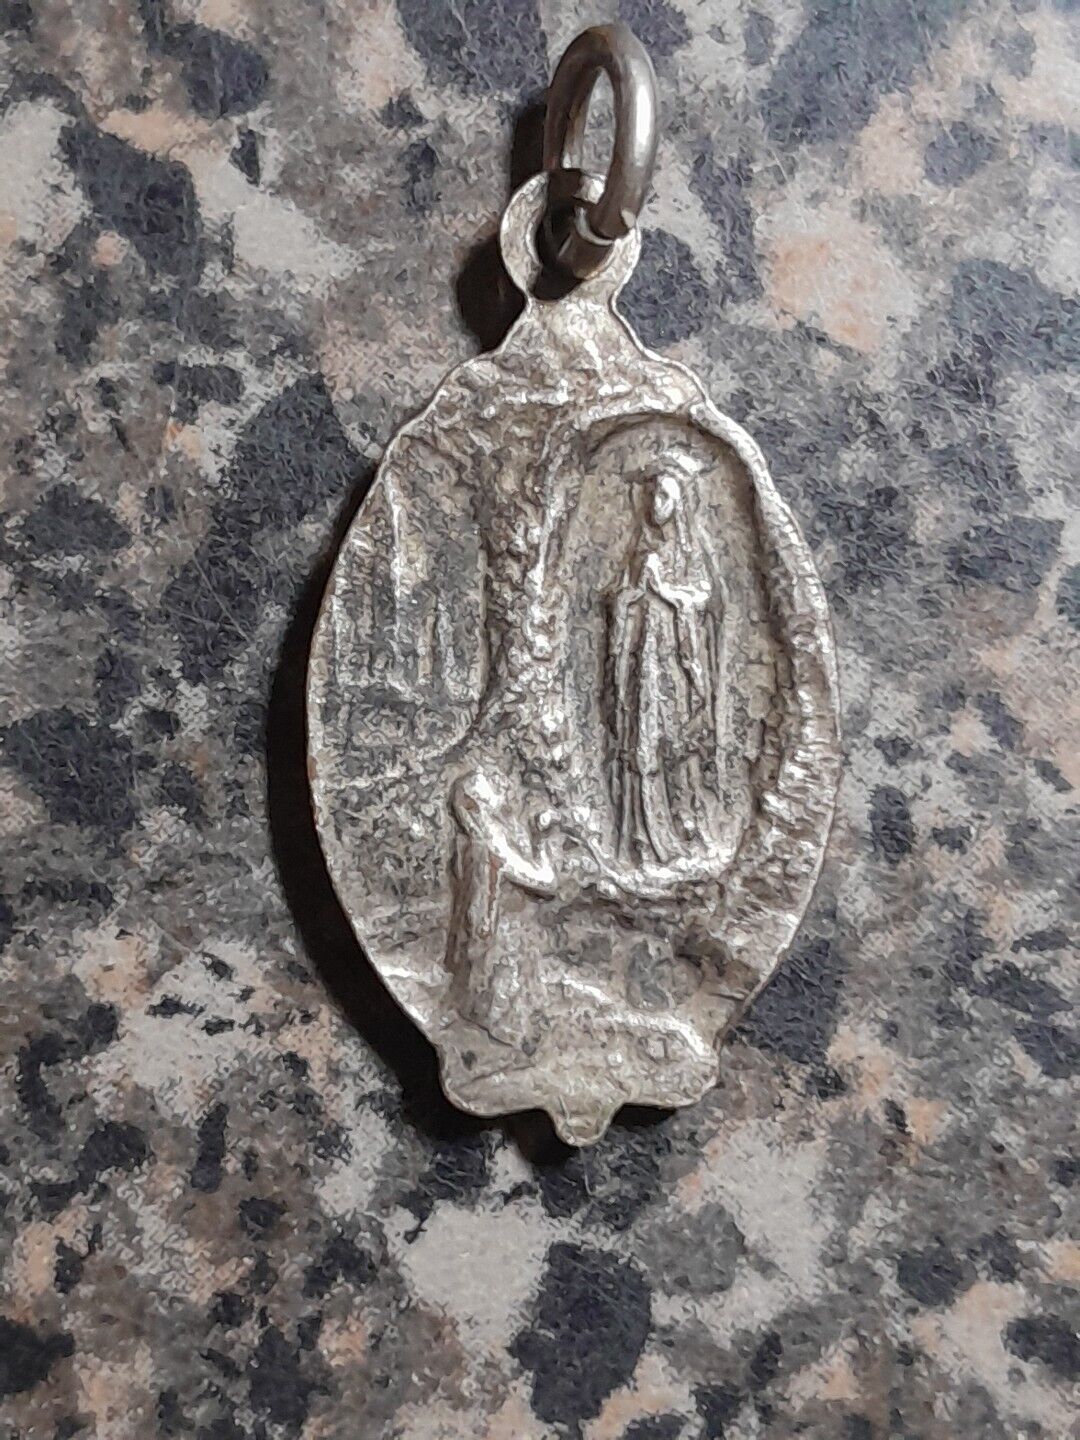 Vintage Catholic Our Lady Of Lourdes Mary St Bernadette Pray For Us Medal 